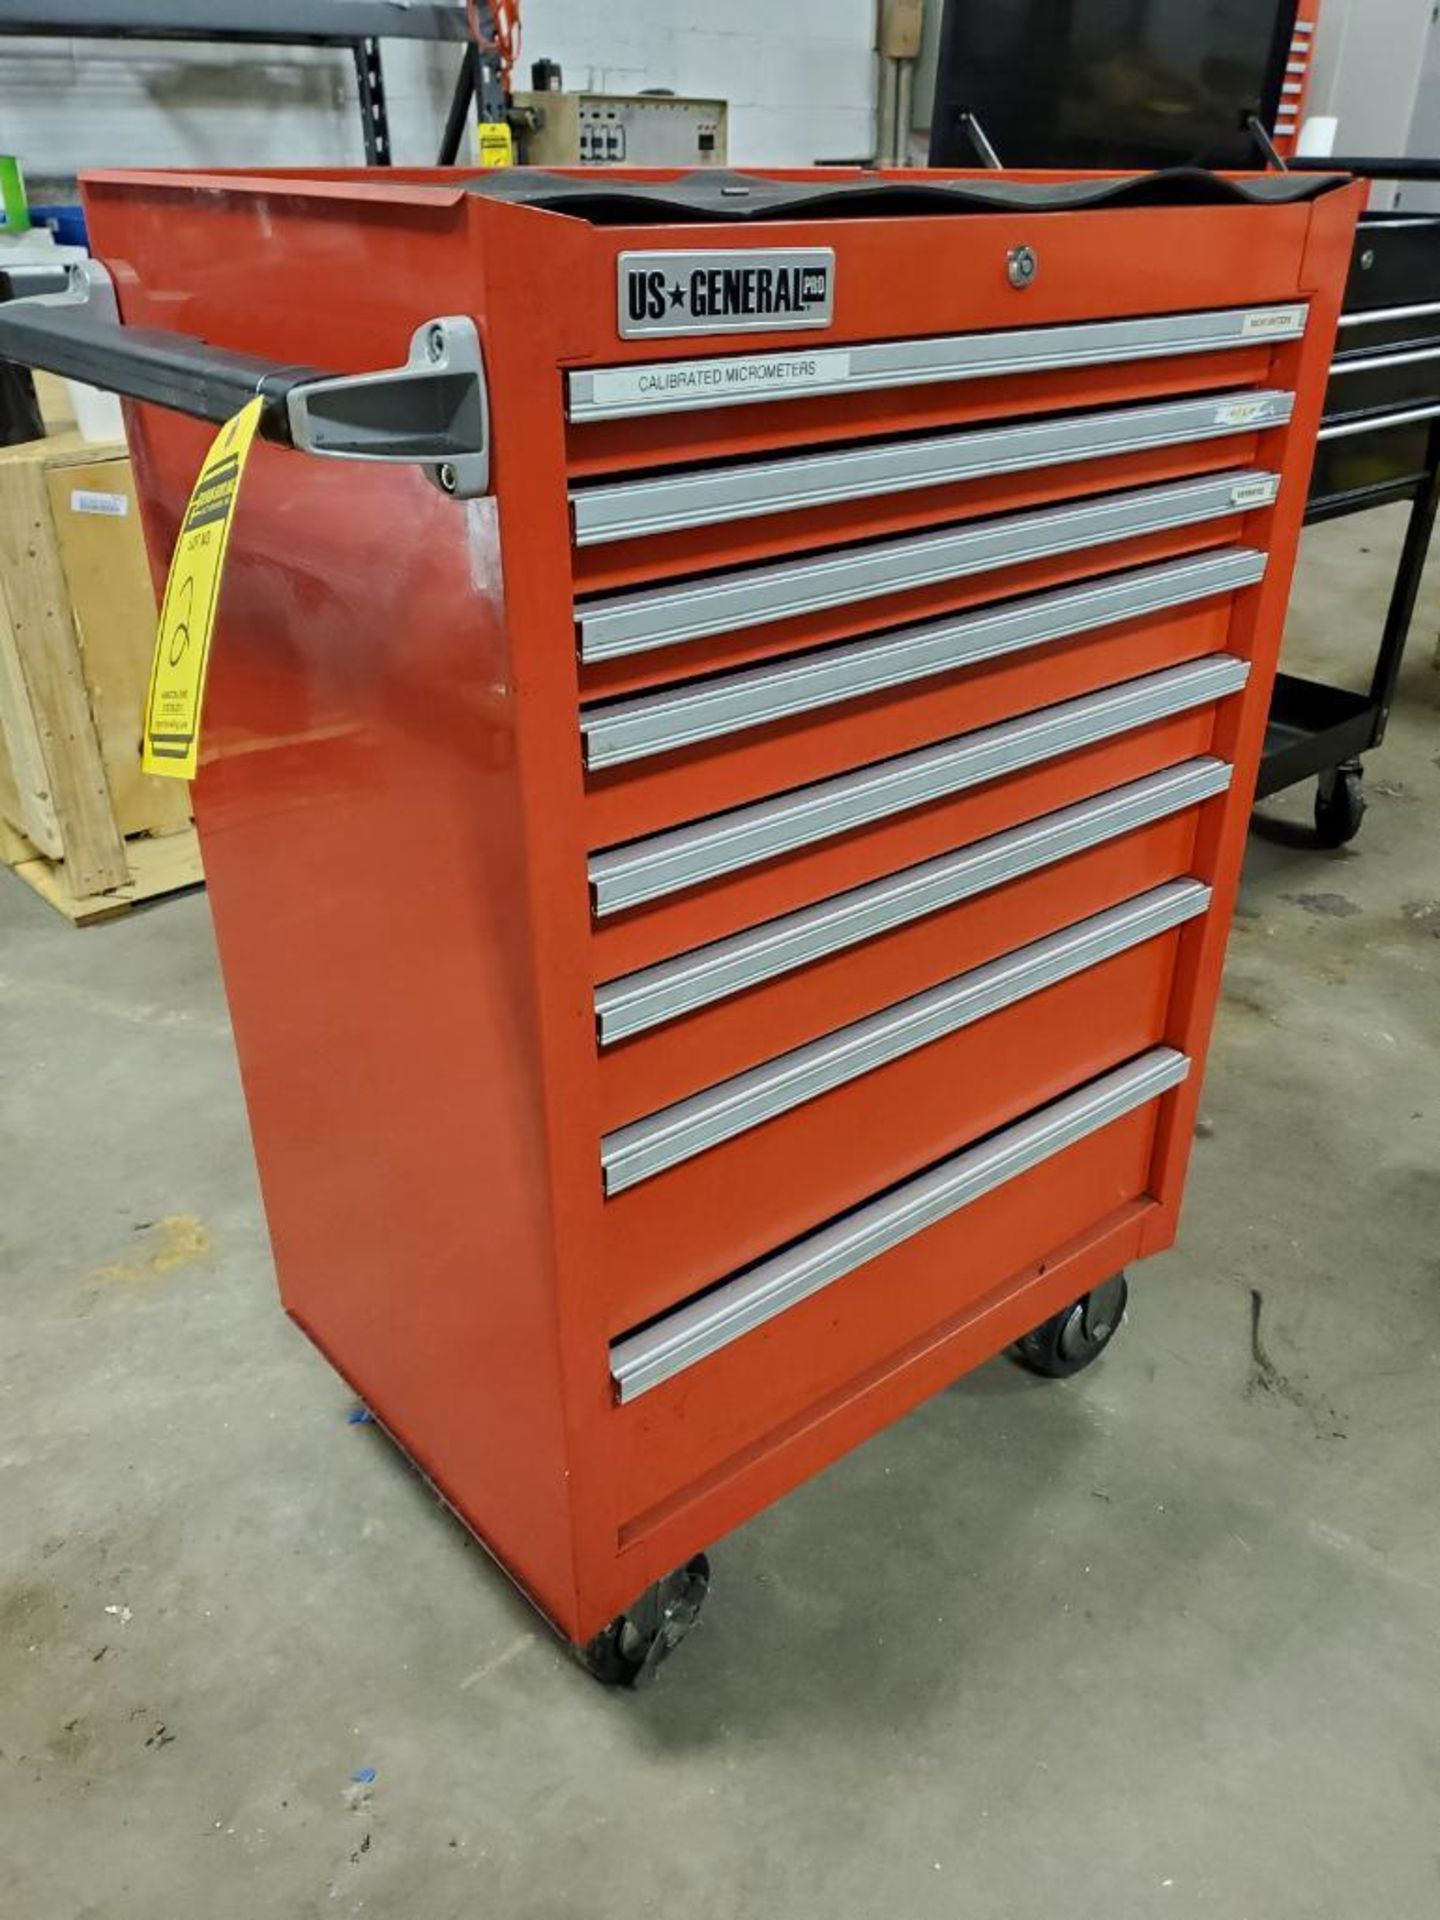 US General Pro 26" 8-Drawer Industrial Rolling Tool Cabinet - Image 3 of 6